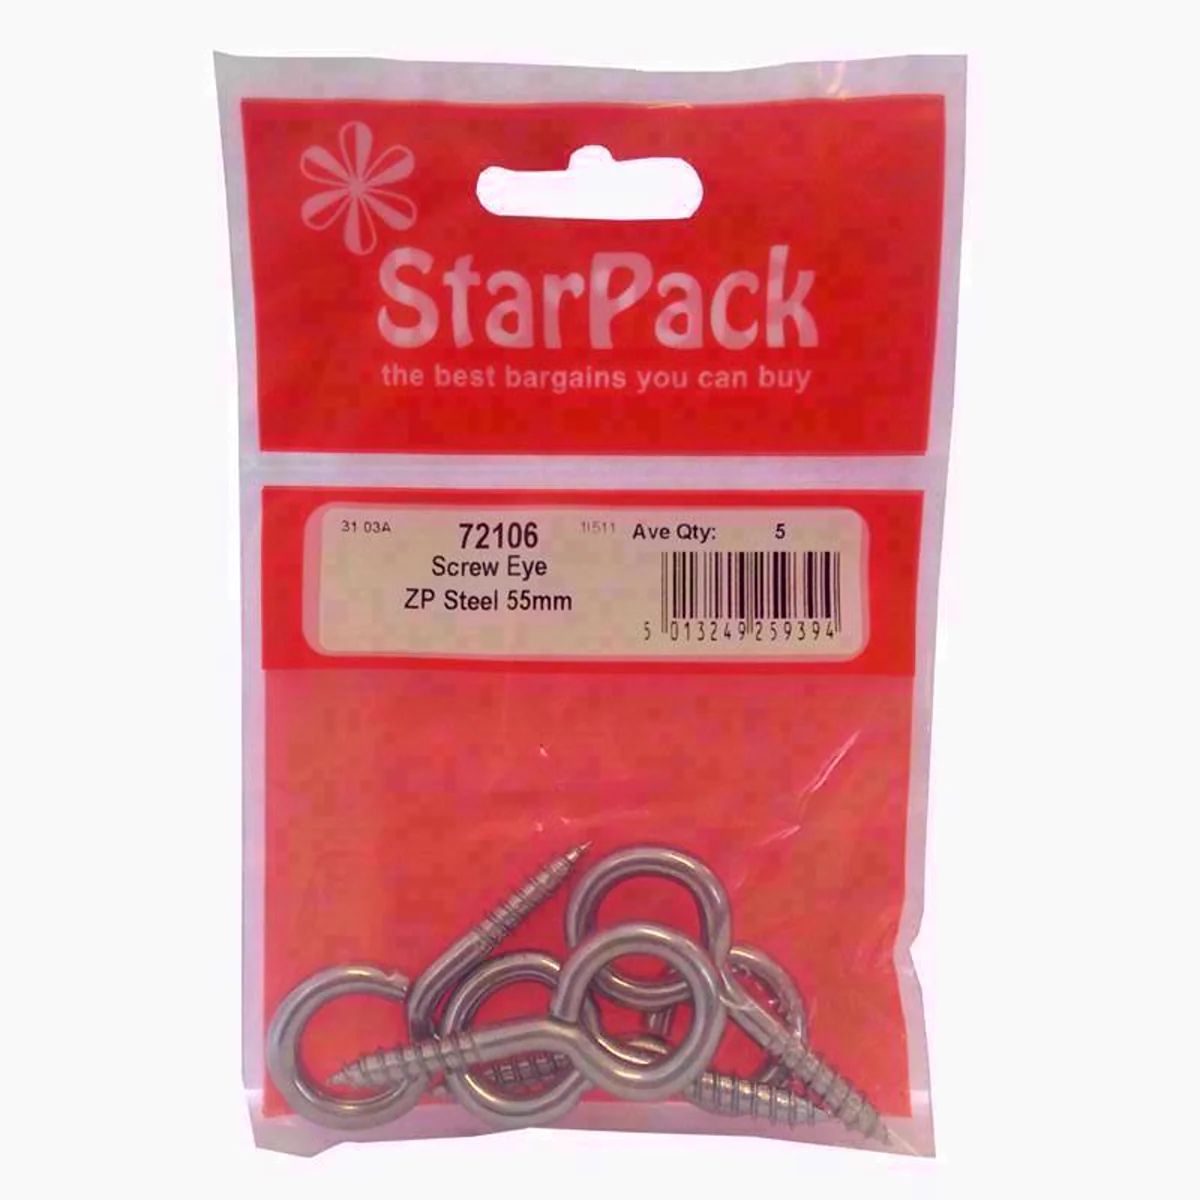 A package of Star Pack - Screw Eye Steel with product code and specifications displayed.